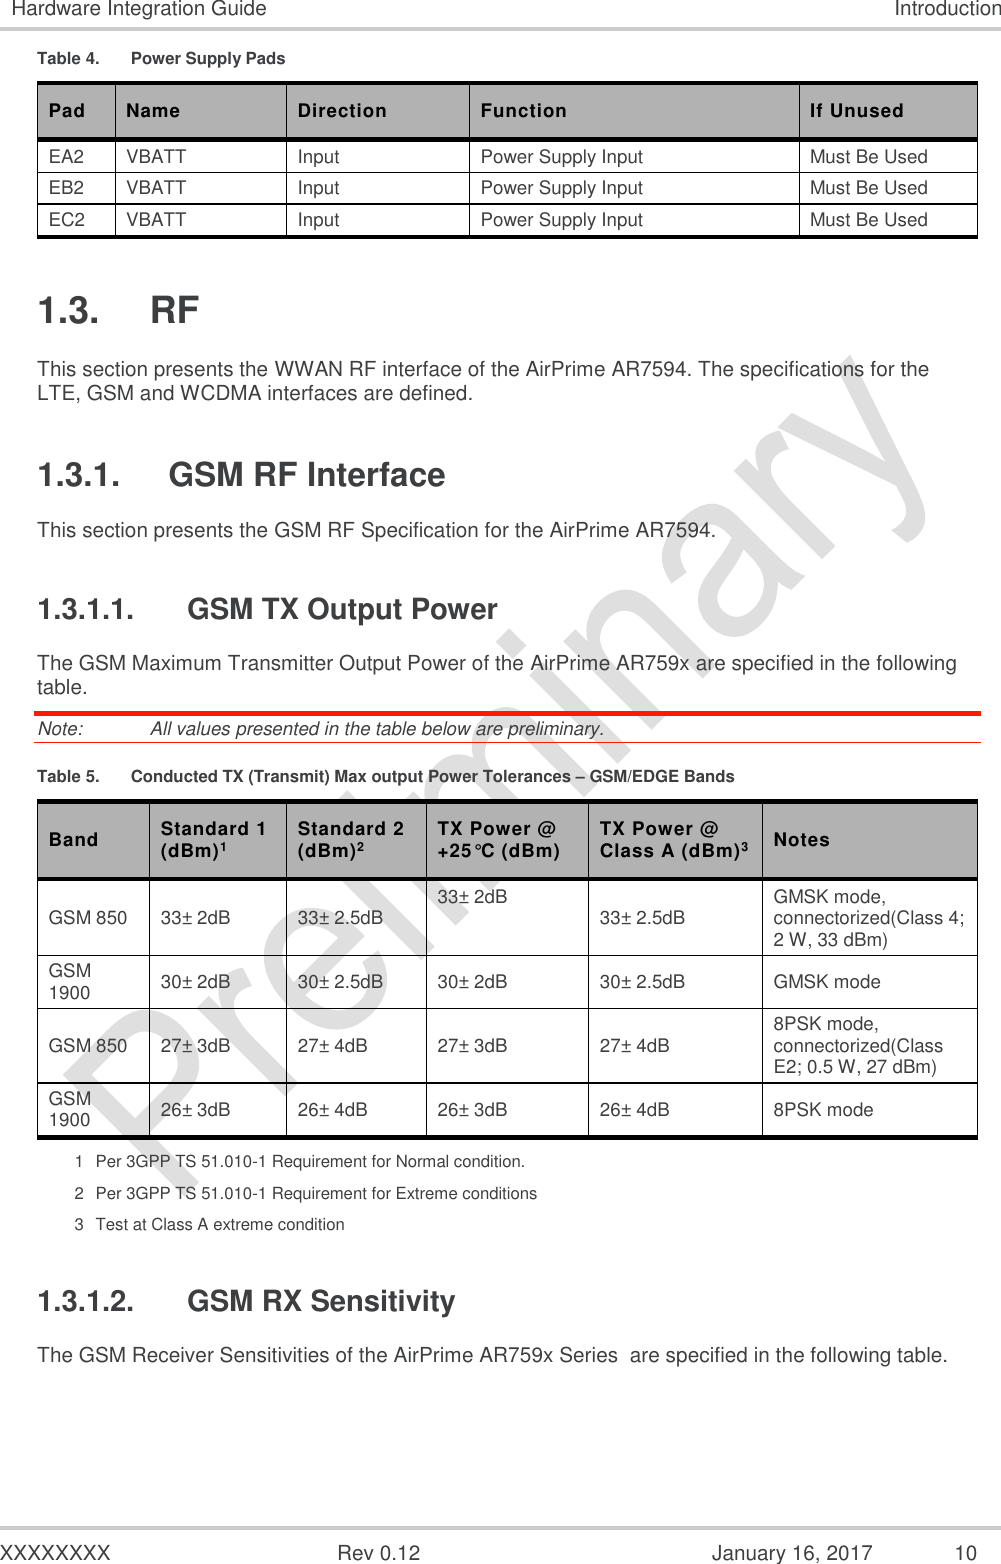  XXXXXXXX  Rev 0.12  January 16, 2017 10 Hardware Integration Guide Introduction Table 4.  Power Supply Pads Pad Name Direction Function If Unused EA2 VBATT Input Power Supply Input Must Be Used EB2 VBATT Input Power Supply Input Must Be Used EC2 VBATT Input Power Supply Input Must Be Used 1.3.  RF This section presents the WWAN RF interface of the AirPrime AR7594. The specifications for the LTE, GSM and WCDMA interfaces are defined. 1.3.1.  GSM RF Interface This section presents the GSM RF Specification for the AirPrime AR7594. 1.3.1.1.  GSM TX Output Power The GSM Maximum Transmitter Output Power of the AirPrime AR759x are specified in the following table. Note:   All values presented in the table below are preliminary. Table 5.  Conducted TX (Transmit) Max output Power Tolerances – GSM/EDGE Bands Band Standard 1 (dBm)1 Standard 2 (dBm)2 TX Power @ +25°C (dBm) TX Power @ Class A (dBm)3 Notes GSM 850 33± 2dB 33± 2.5dB 33± 2dB 33± 2.5dB GMSK mode, connectorized(Class 4; 2 W, 33 dBm) GSM 1900 30± 2dB 30± 2.5dB 30± 2dB 30± 2.5dB GMSK mode GSM 850 27± 3dB 27± 4dB 27± 3dB 27± 4dB 8PSK mode, connectorized(Class E2; 0.5 W, 27 dBm) GSM 1900 26± 3dB 26± 4dB 26± 3dB 26± 4dB 8PSK mode 1  Per 3GPP TS 51.010-1 Requirement for Normal condition. 2  Per 3GPP TS 51.010-1 Requirement for Extreme conditions 3  Test at Class A extreme condition 1.3.1.2.  GSM RX Sensitivity The GSM Receiver Sensitivities of the AirPrime AR759x Series  are specified in the following table. 